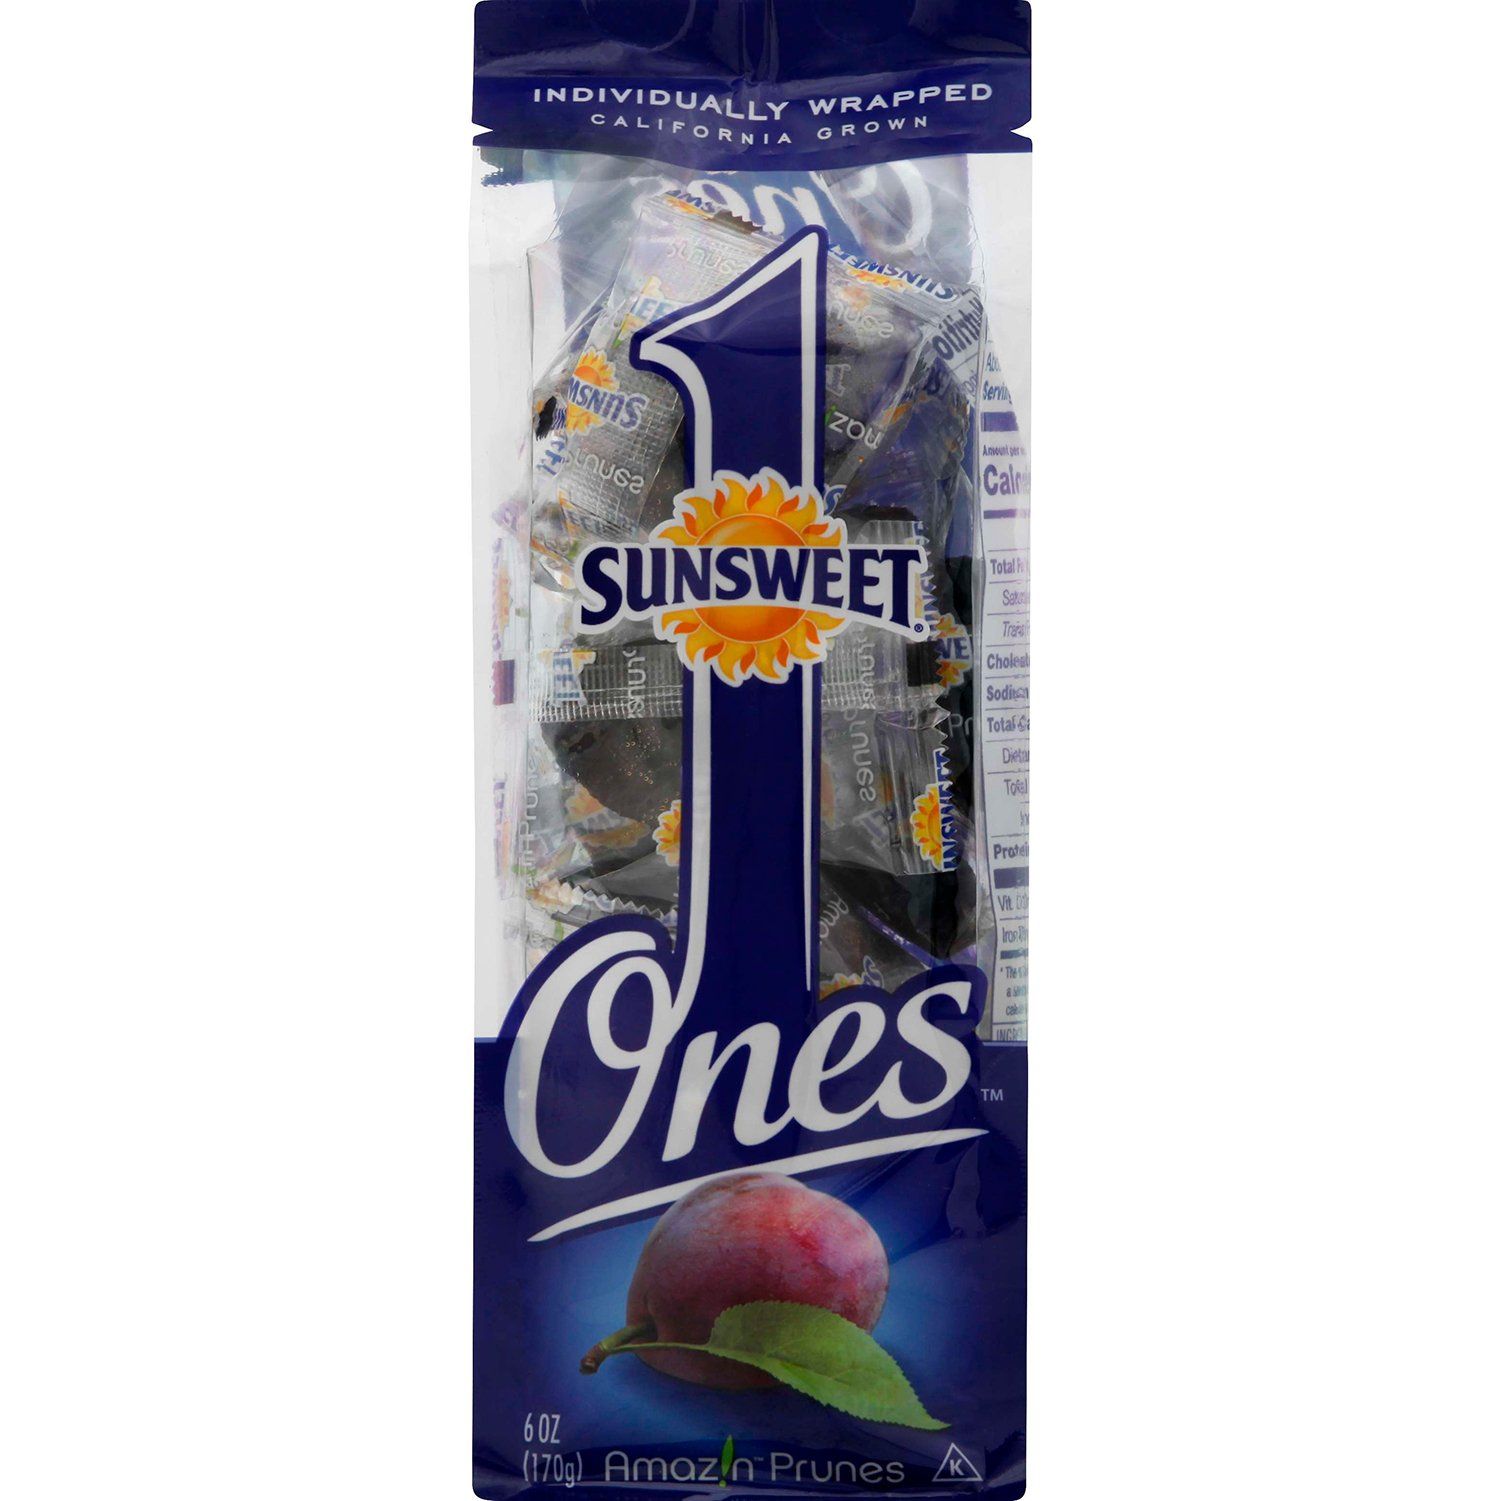 Sunsweet Amaz!n Prune Sunsweet Ones (Individually Wrapped) 6 Ounce 